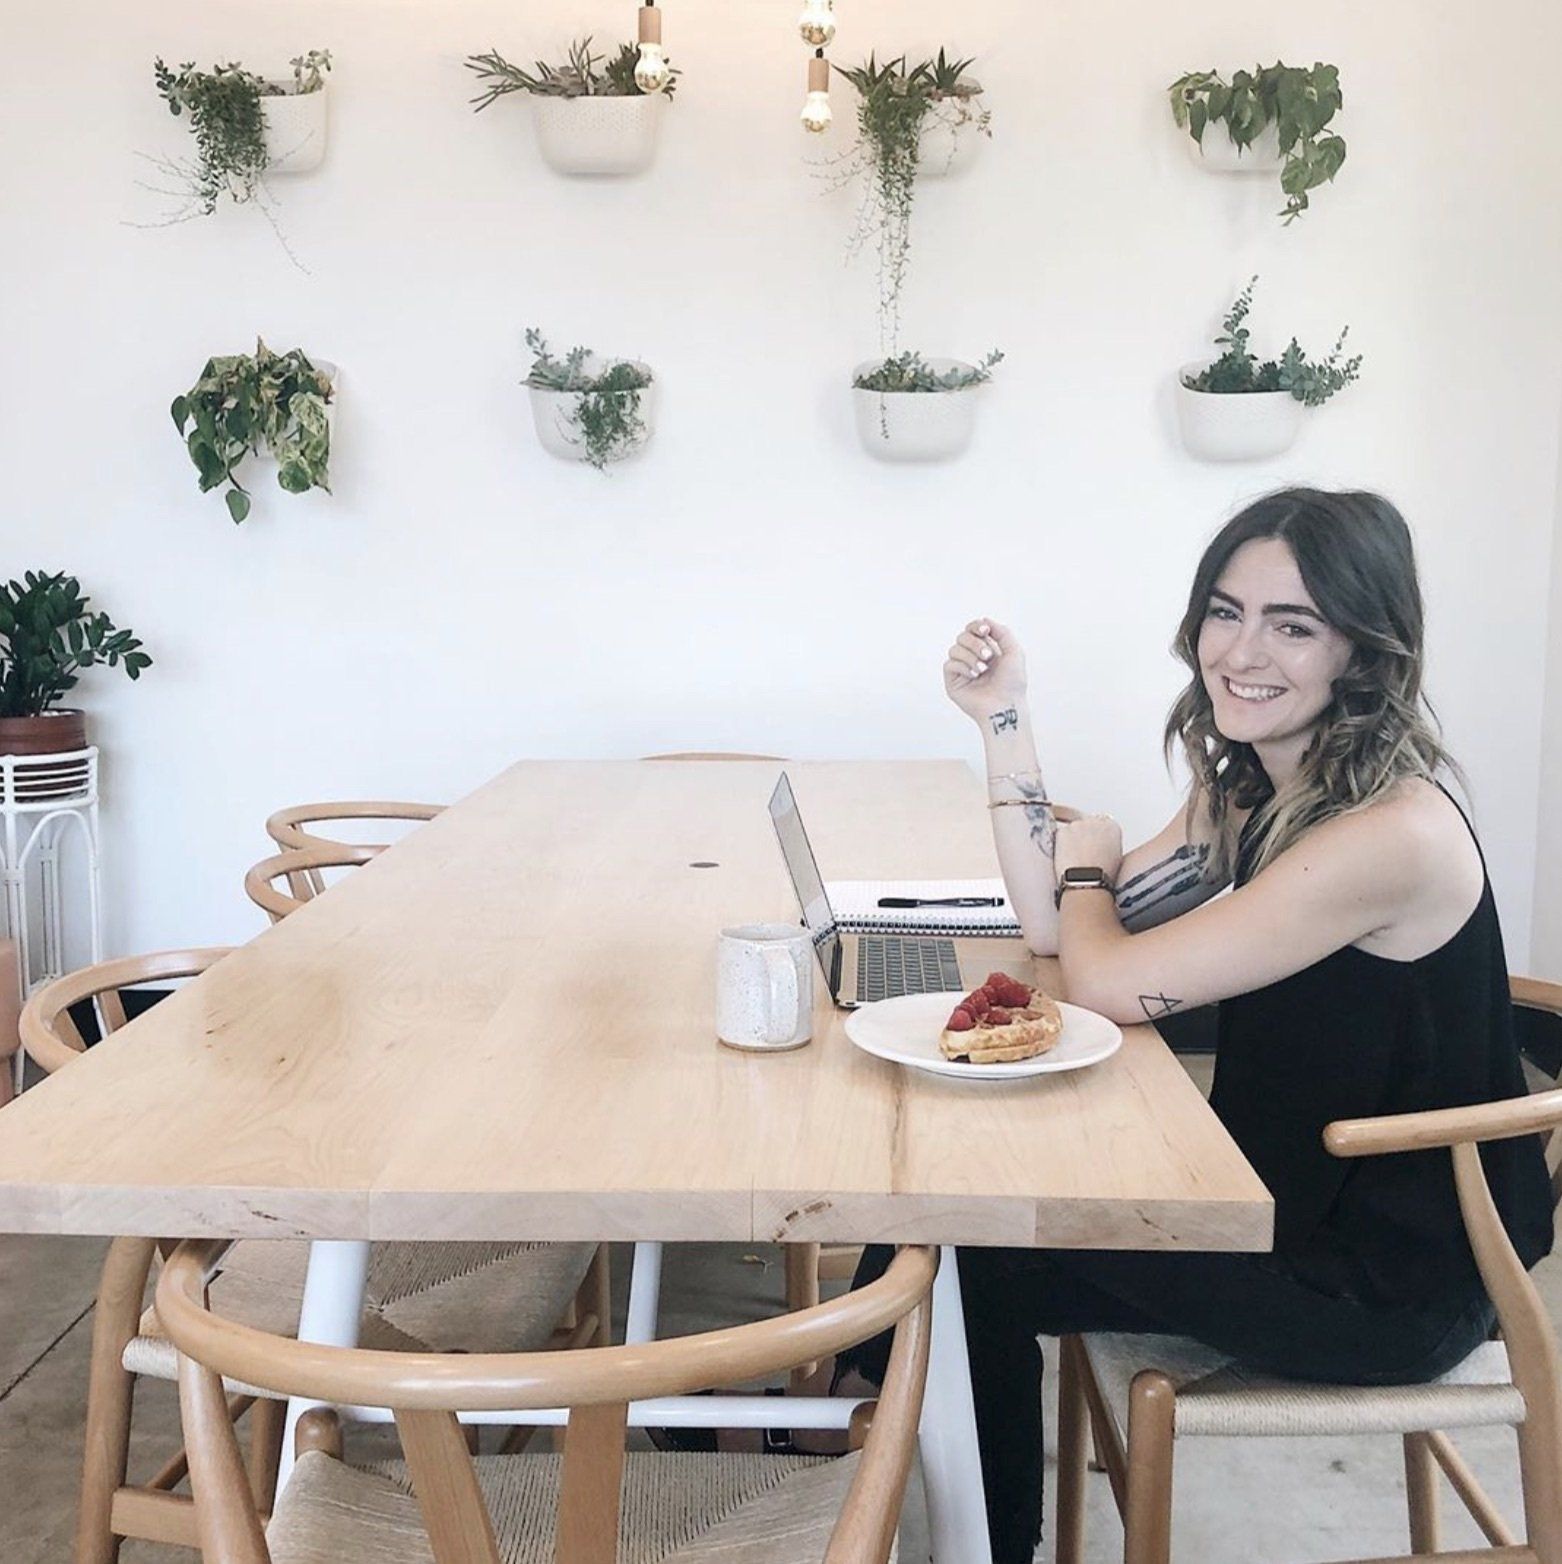 Debbie Mayes smiles about finding her Instagram niche while sitting at a table with her laptop and raspberry topped waffles.